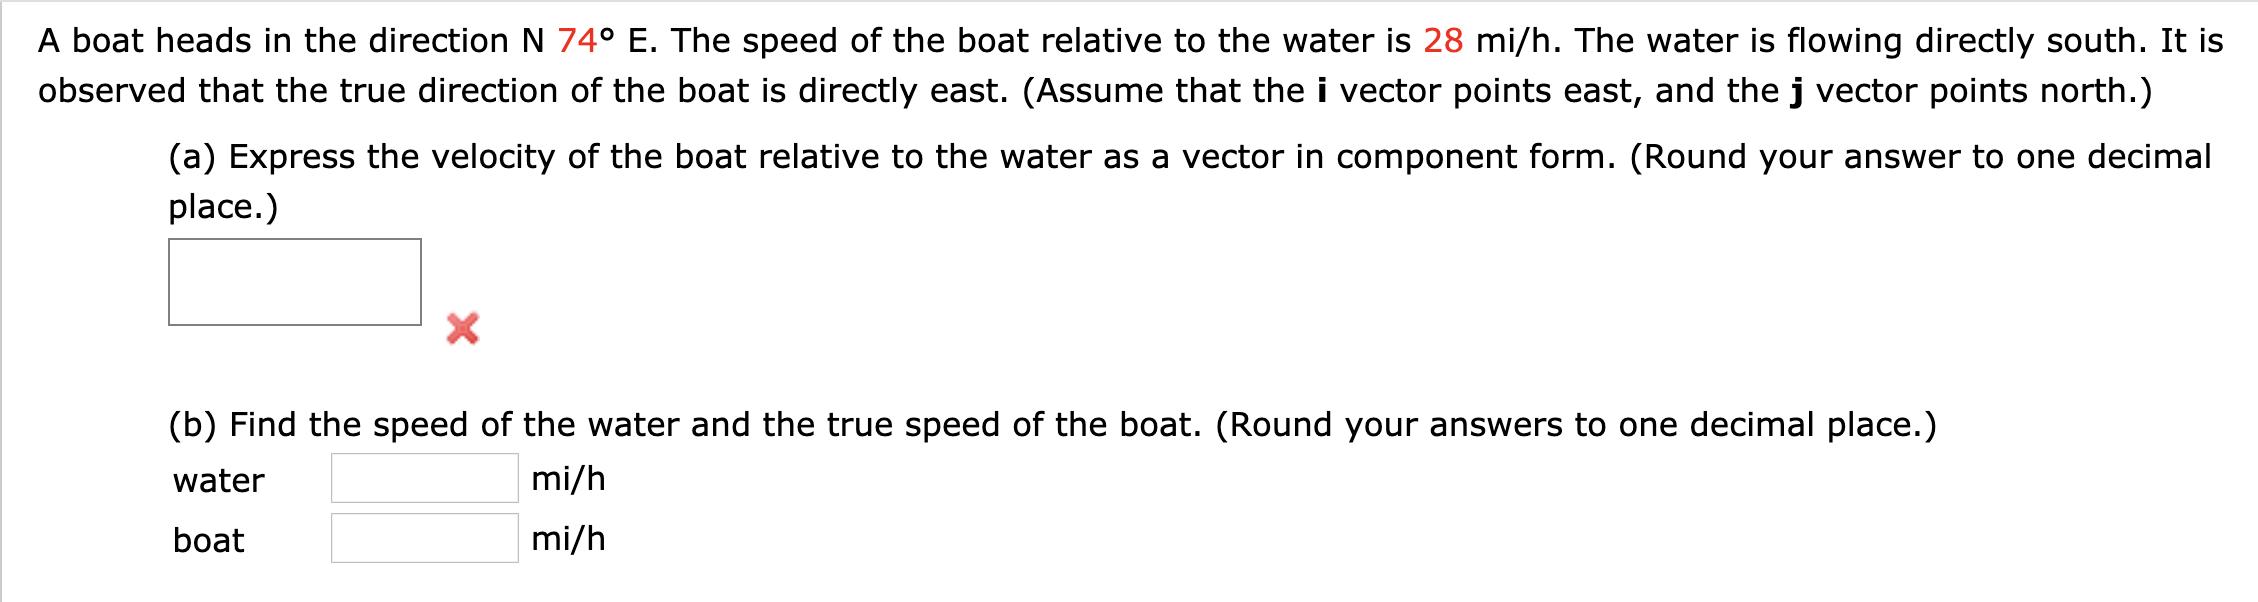 A boat heads in the direction N 74° E. The speed of the boat relative to the water is 28 mi/h. The water is flowing directly south. It is
observed that the true direction of the boat is directly east. (Assume that the i vector points east, and the j vector points north.)
(a) Express the velocity of the boat relative to the water as a vector in component form. (Round your answer to one decimal
place.)
X
(b) Find the speed of the water and the true speed of the boat. (Round your answers to one decimal place.)
mi/h
water
mi/h
boat
